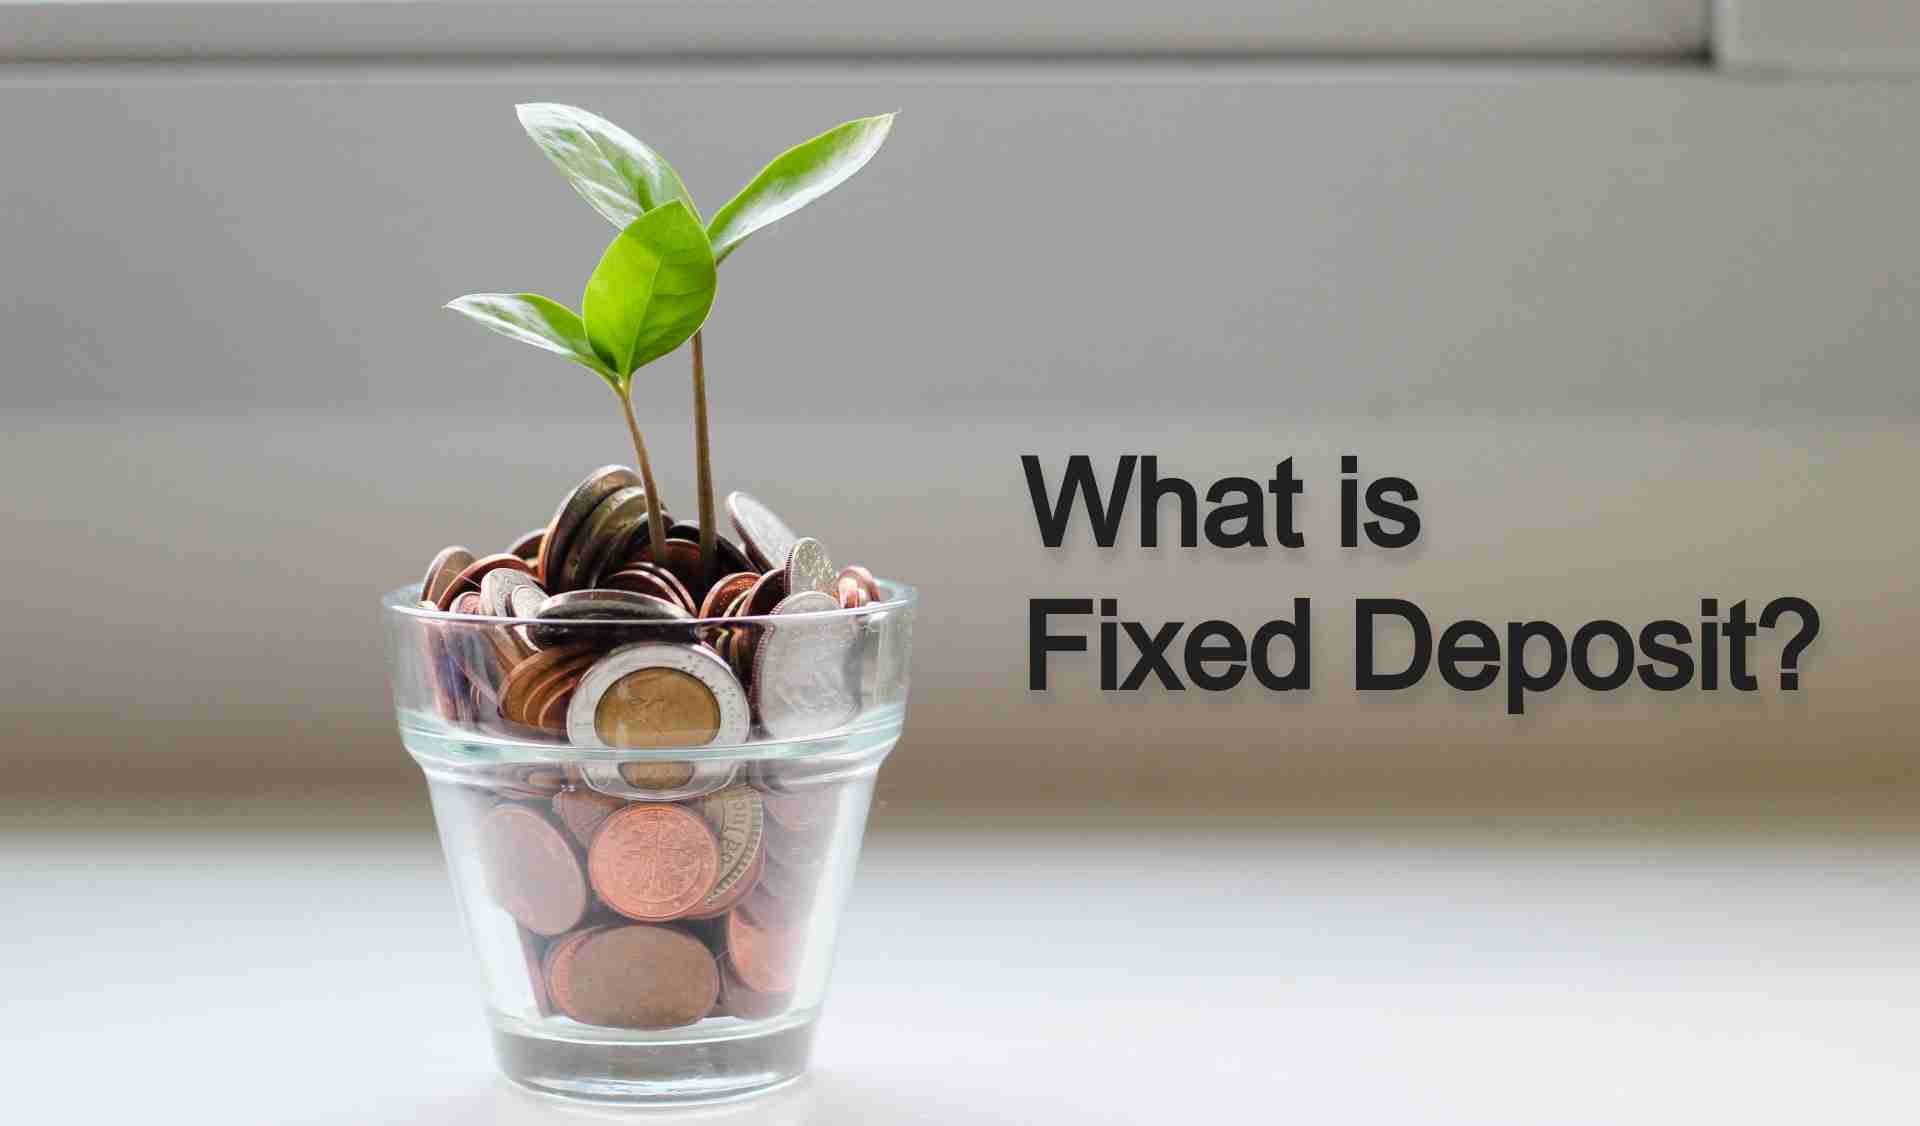 What is Fixed Deposit